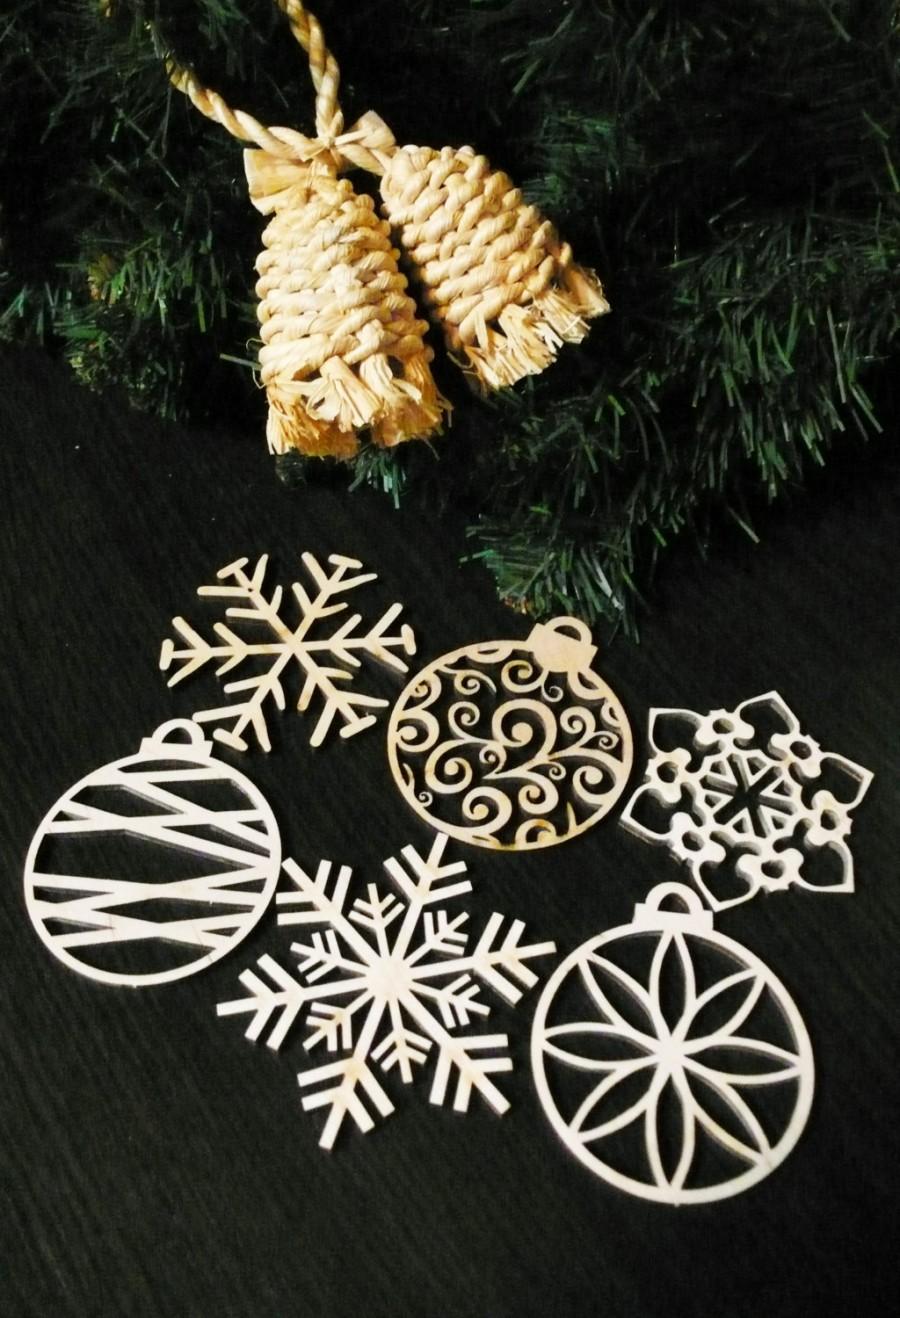 Hochzeit - Set of 6-12 Christmas Snowflake Wooden Snowflake Christmas Tree Ornaments New Year Gift Christmas Ornaments Chrismas Gift Wooden Decoration